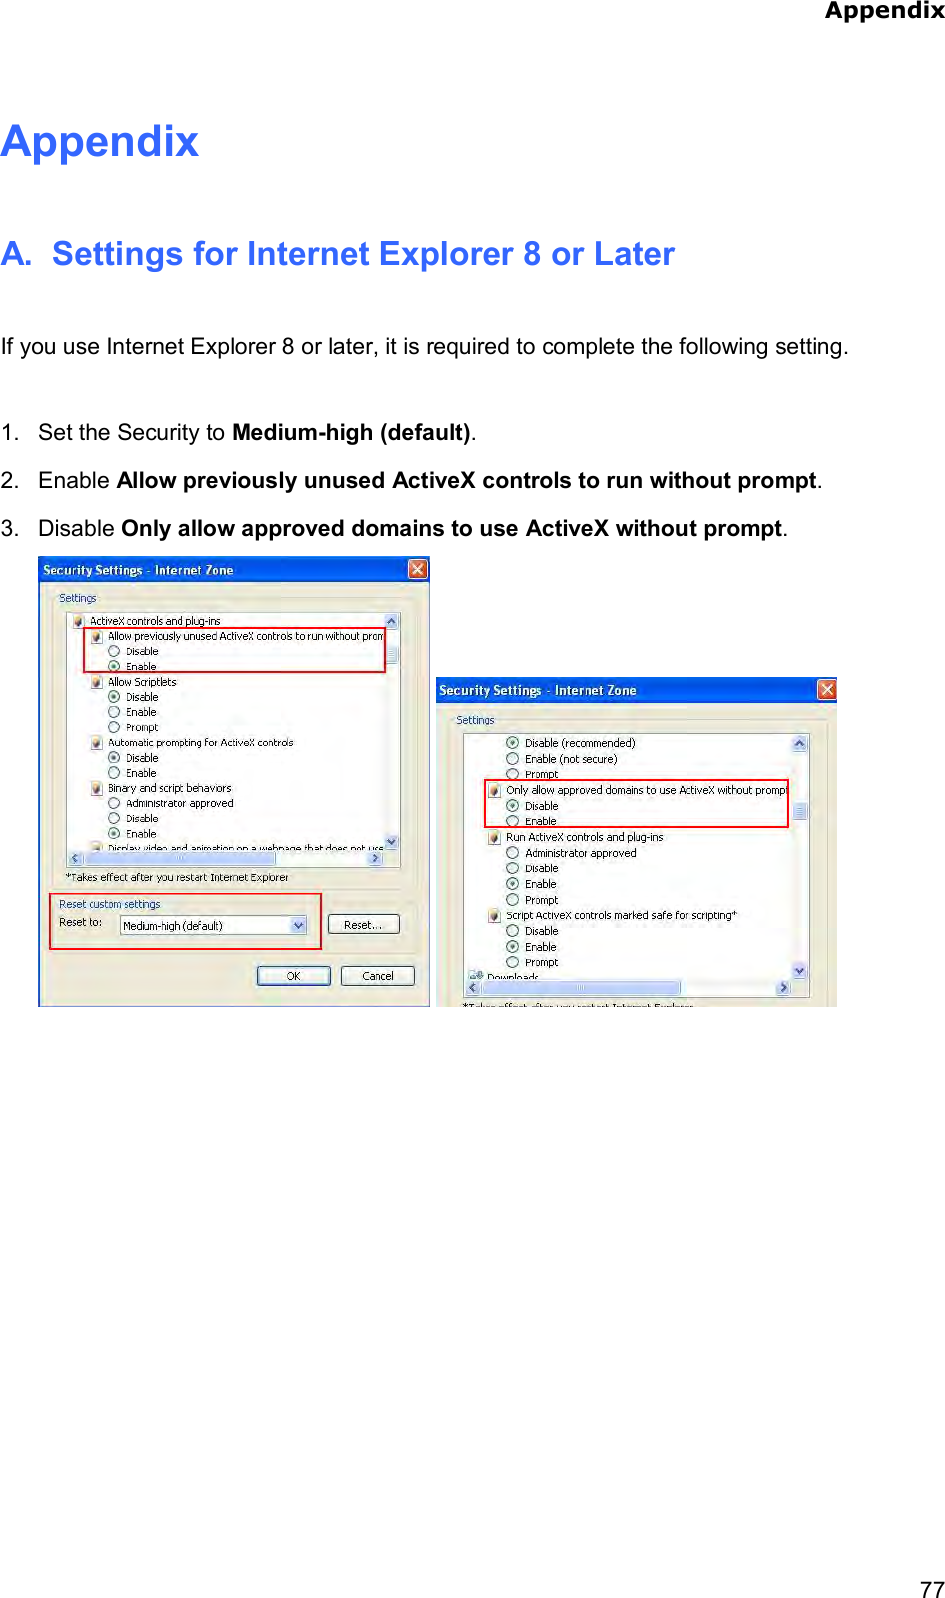  Appendix    77Appendix A.  Settings for Internet Explorer 8 or Later  If you use Internet Explorer 8 or later, it is required to complete the following setting.  1.  Set the Security to Medium-high (default). 2.  Enable Allow previously unused ActiveX controls to run without prompt. 3.  Disable Only allow approved domains to use ActiveX without prompt.      